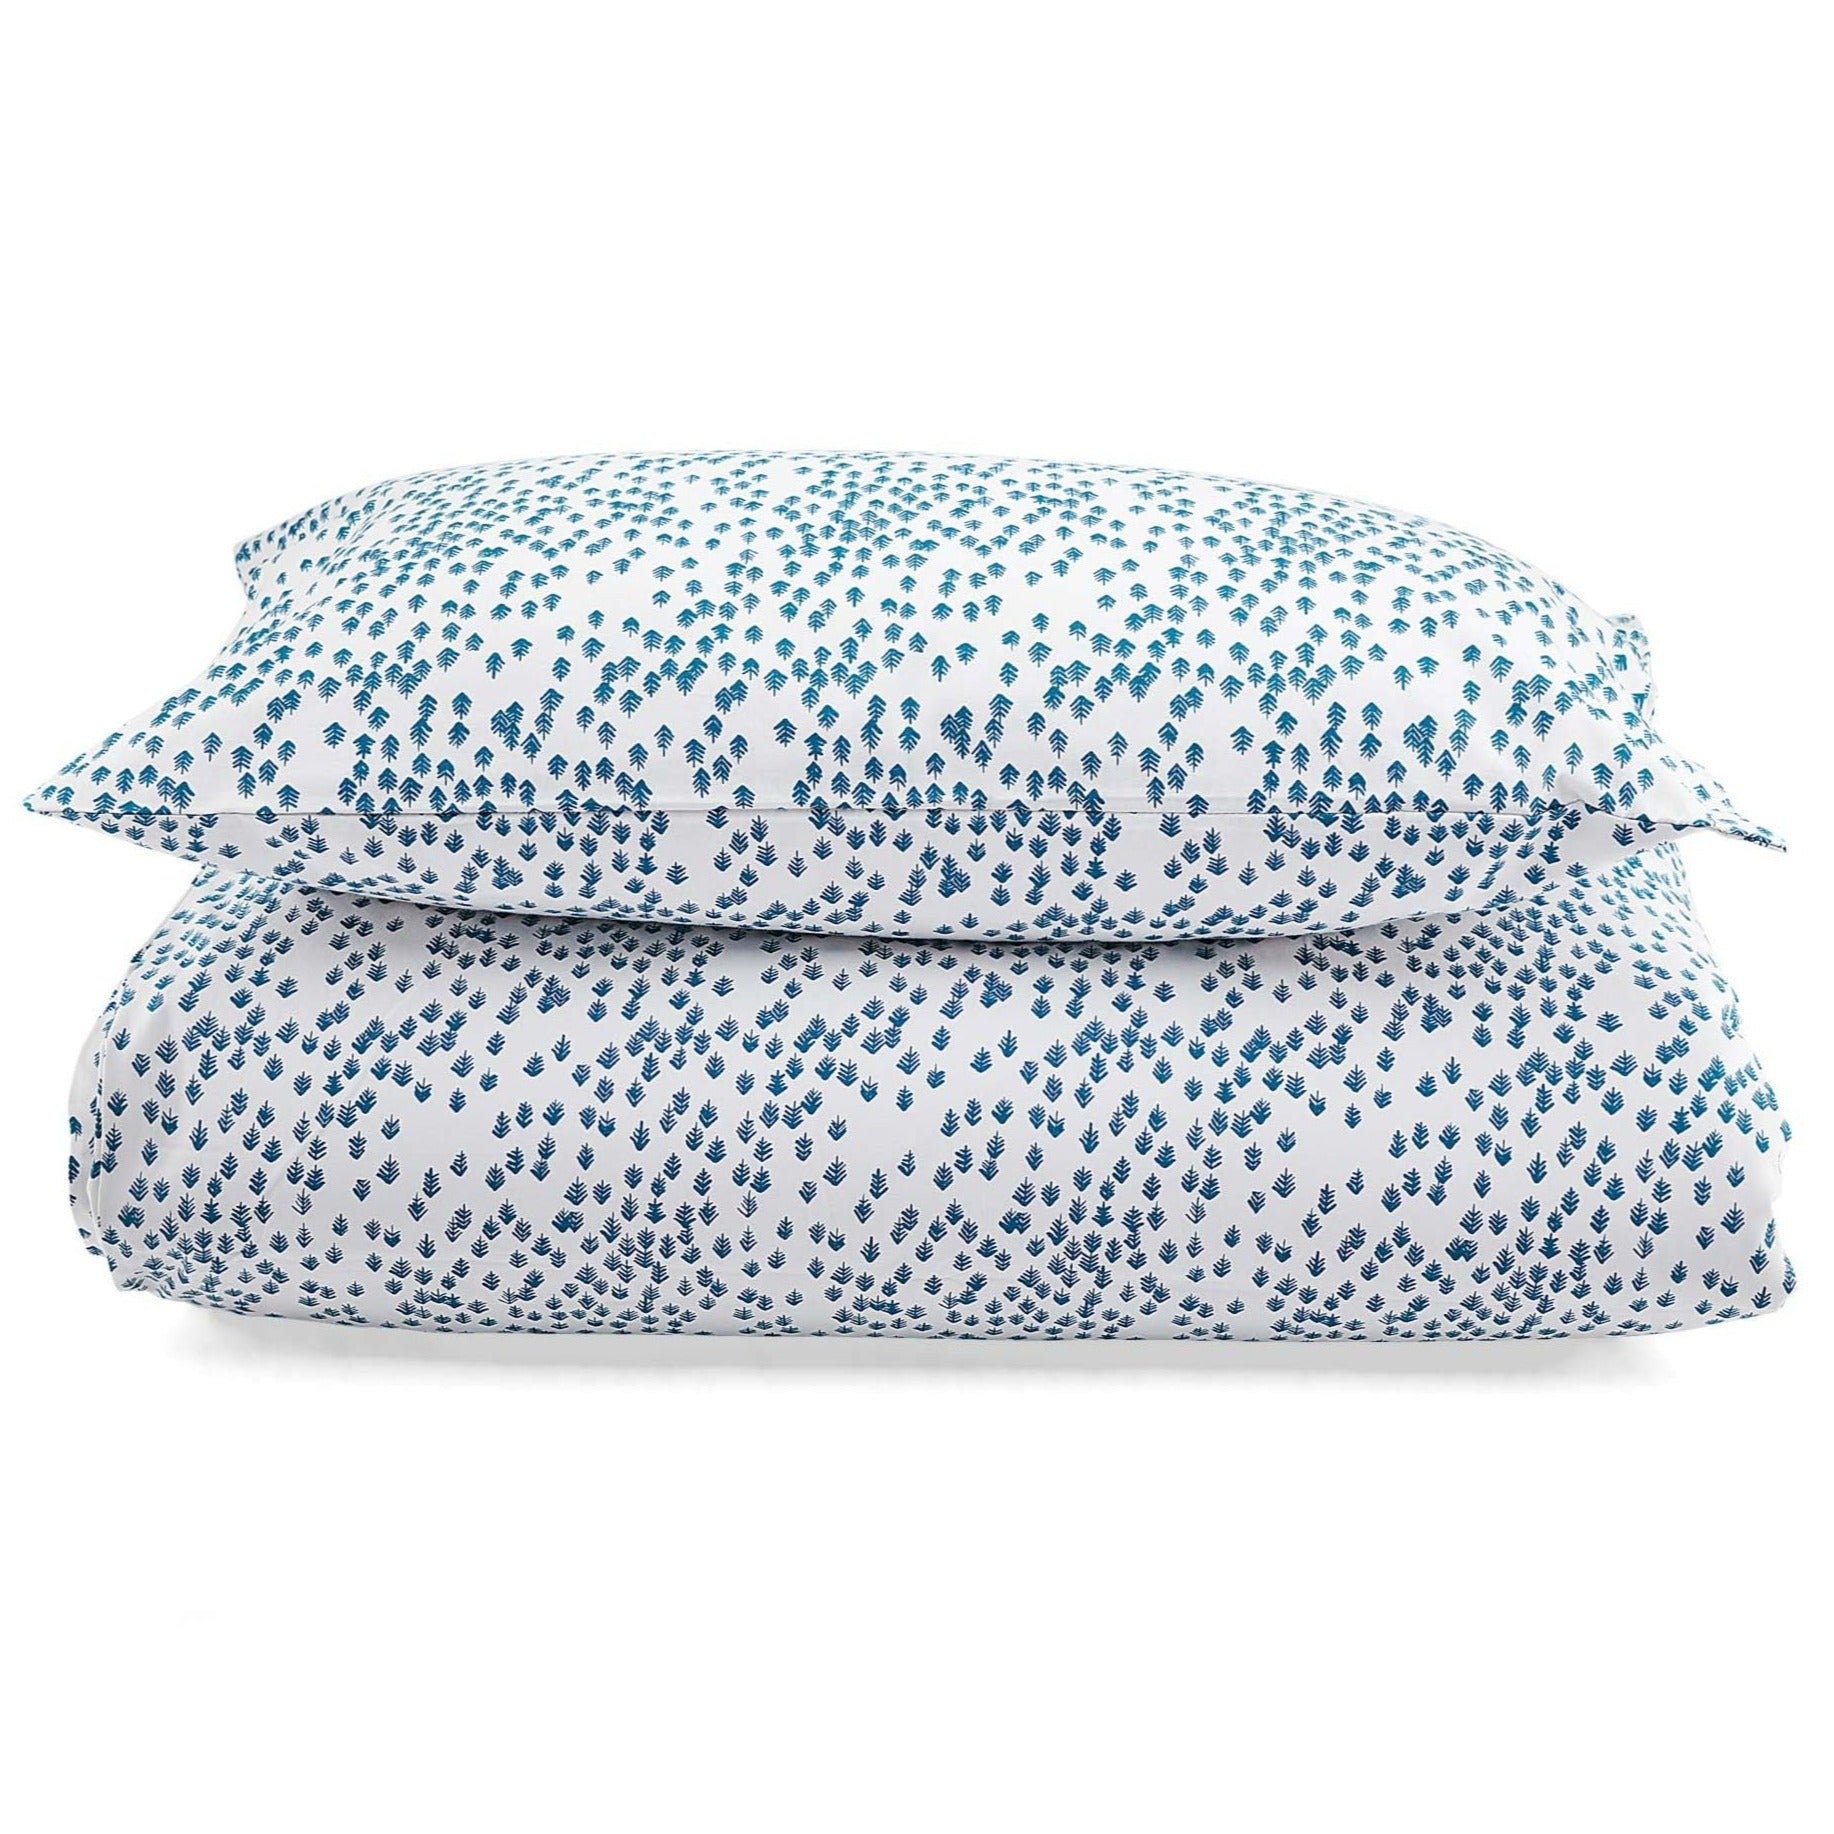 Cotbed Organic Cotton Bedding Set - Nordic Forest - Avery Row